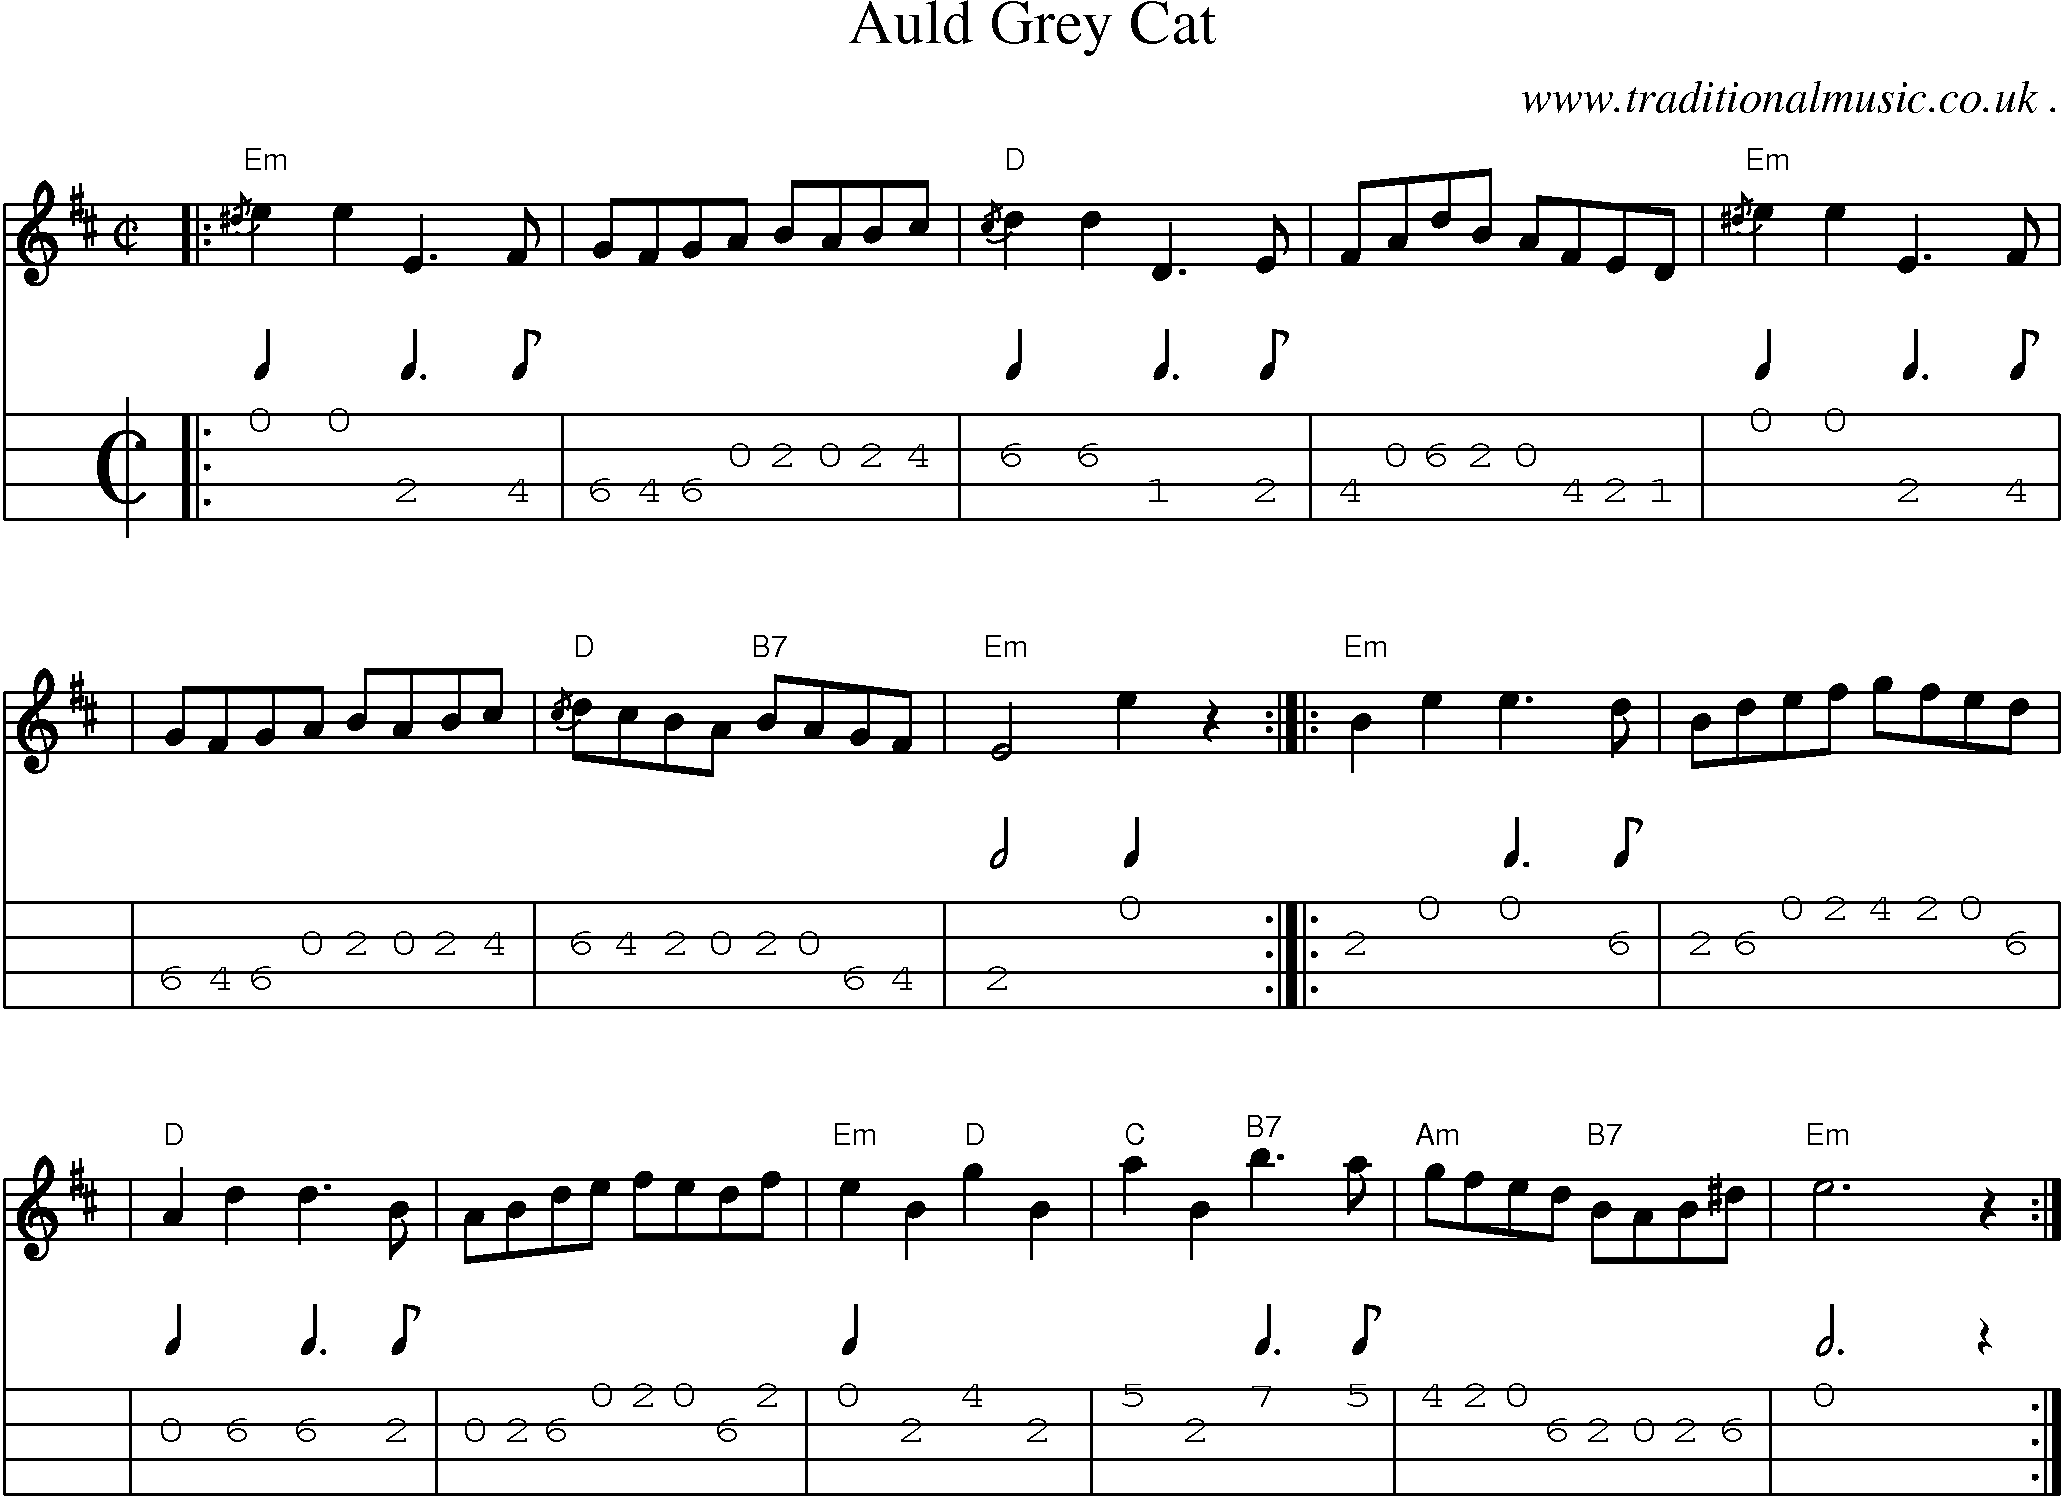 Sheet-music  score, Chords and Mandolin Tabs for Auld Grey Cat